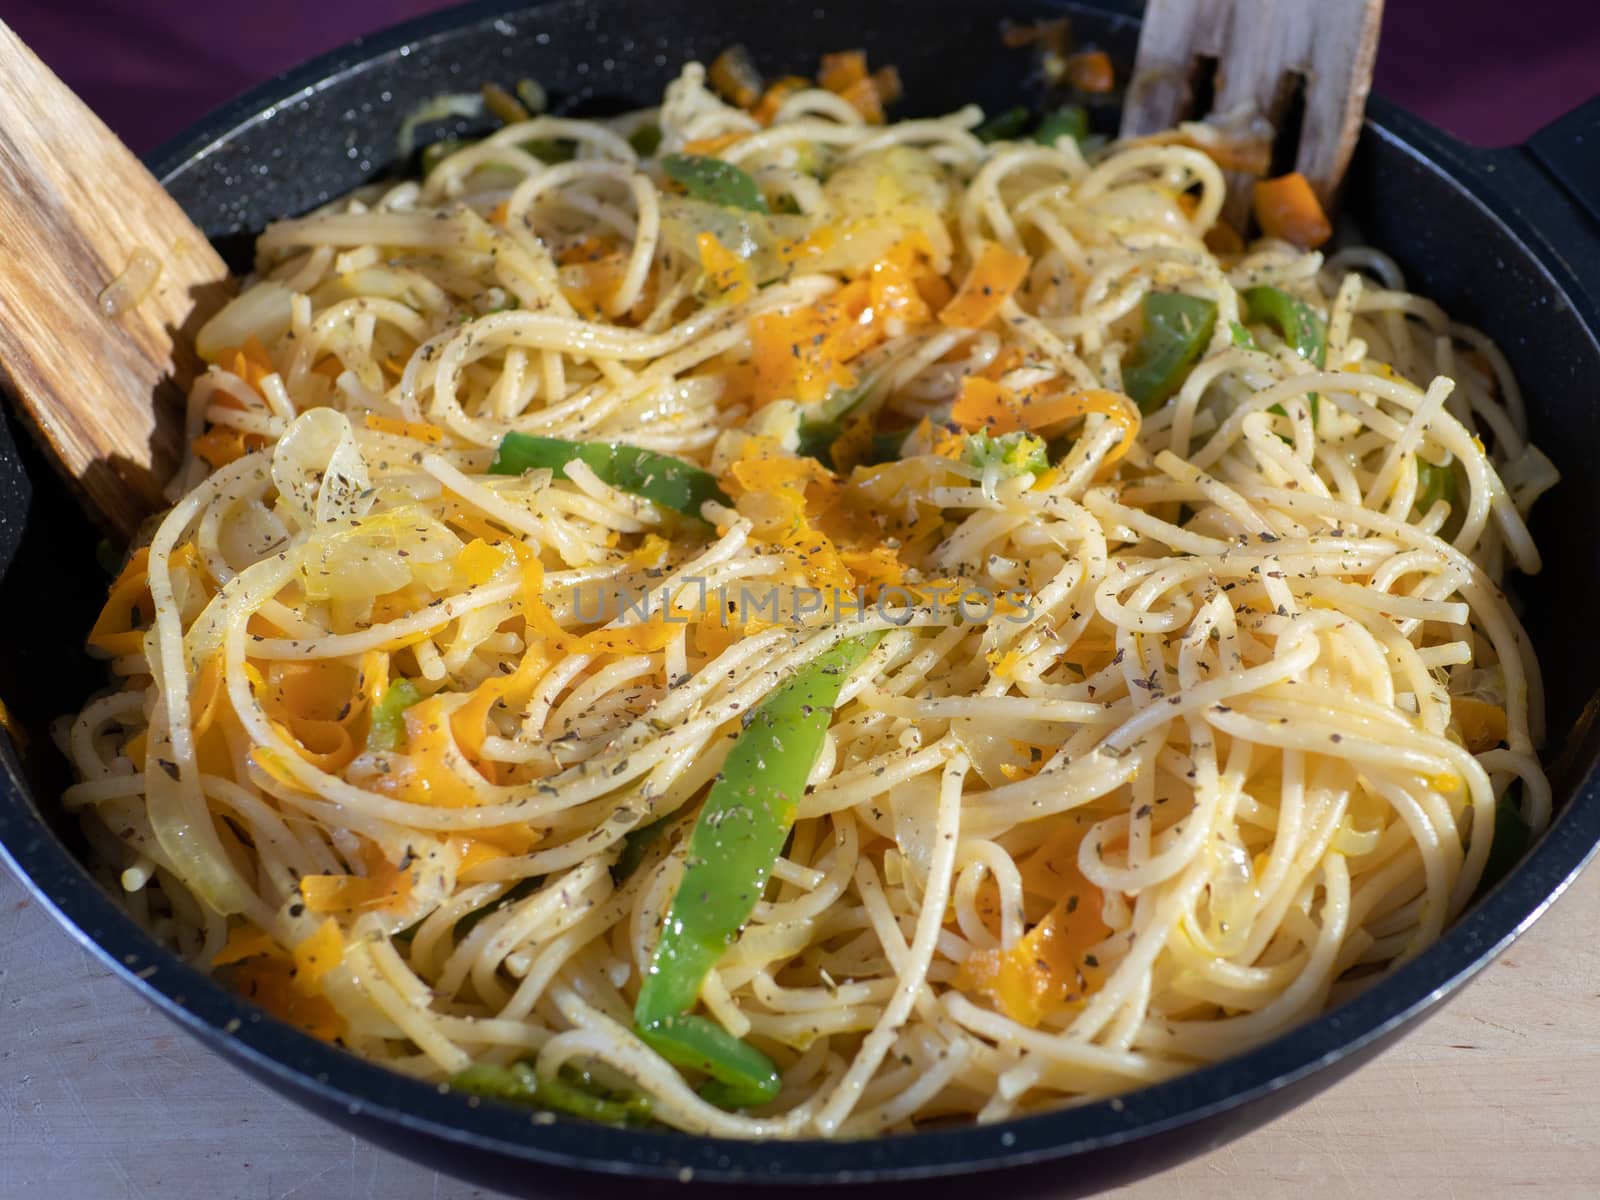 noodles with vegetables in a pan by jmagfoto